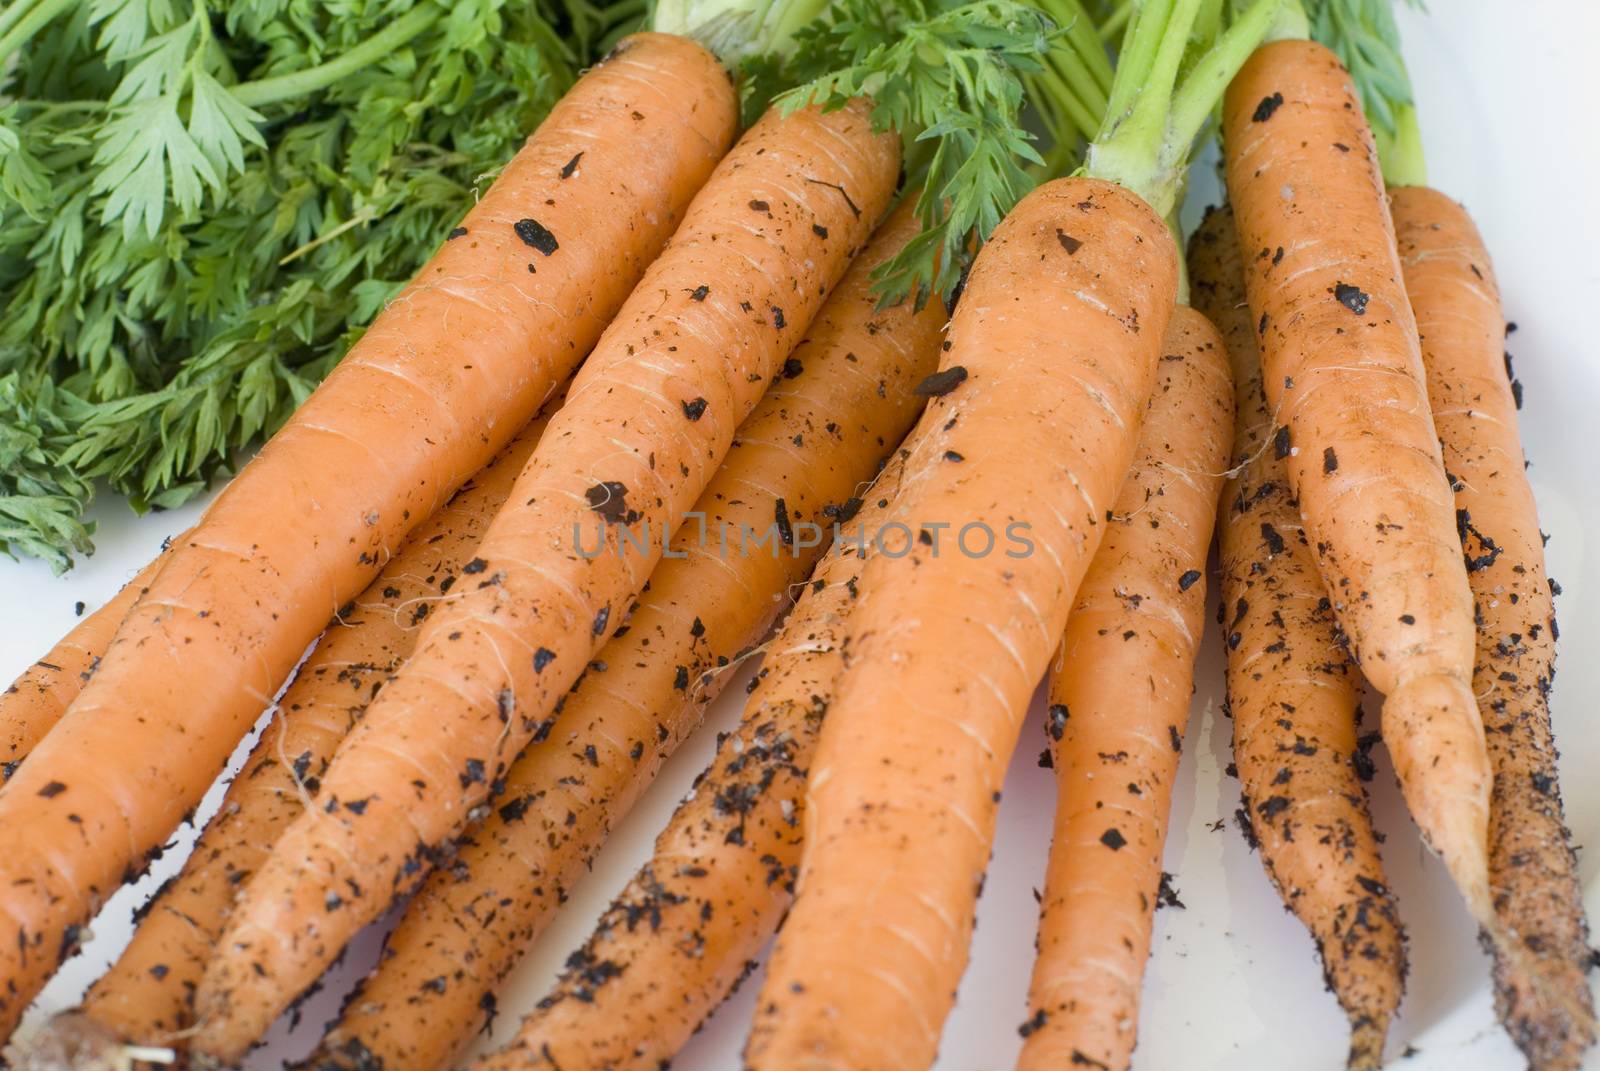 Freshly picked home grown carrots by stockarch